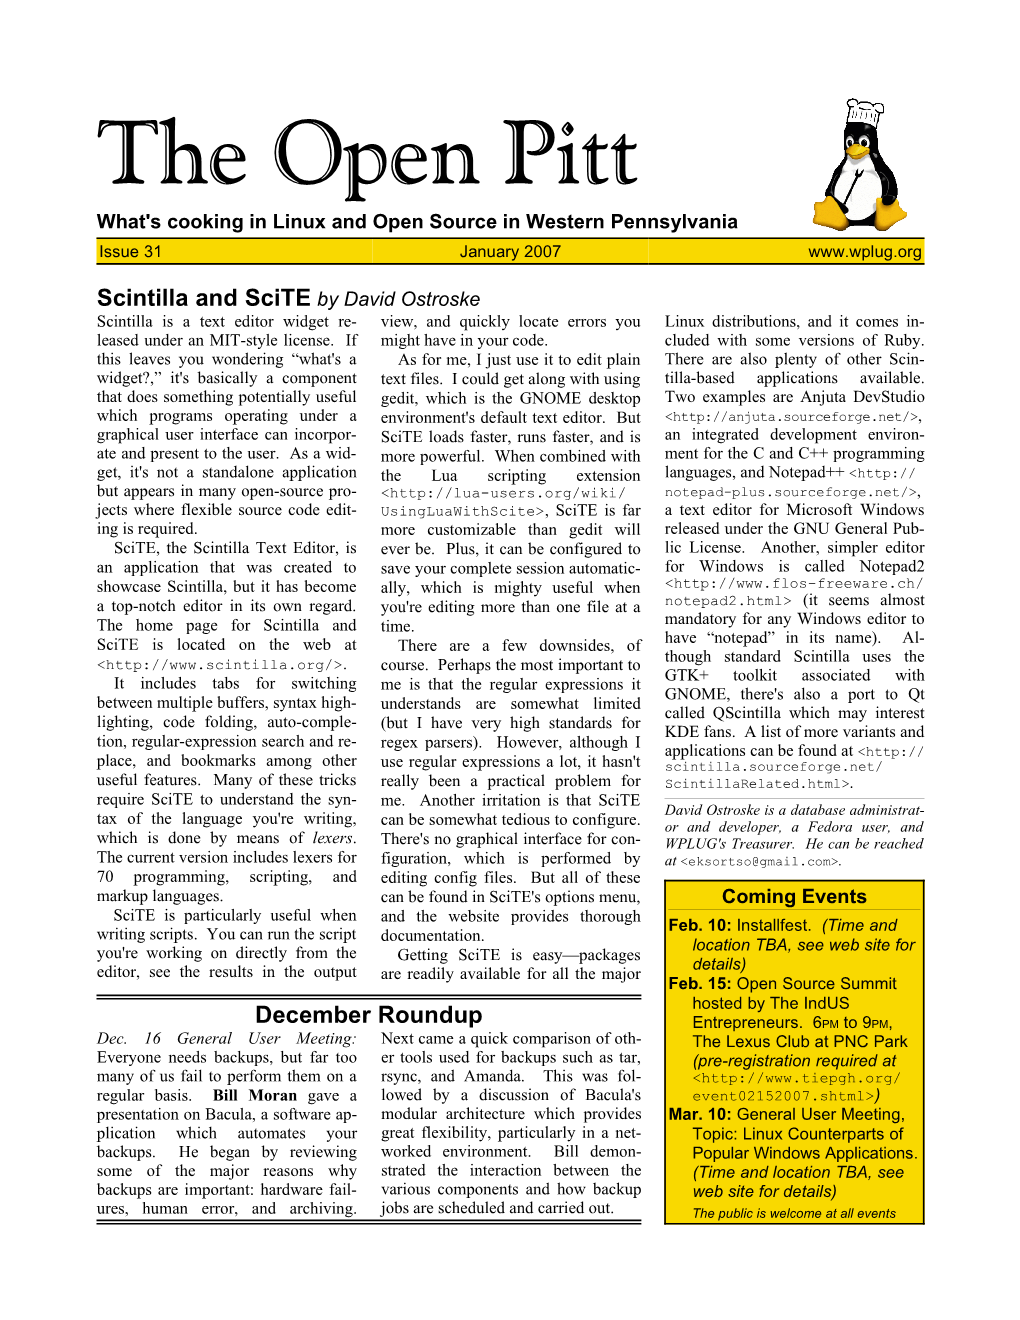 The Open Pitt What's Cooking in Linux and Open Source in Western Pennsylvania Issue 31 January 2007